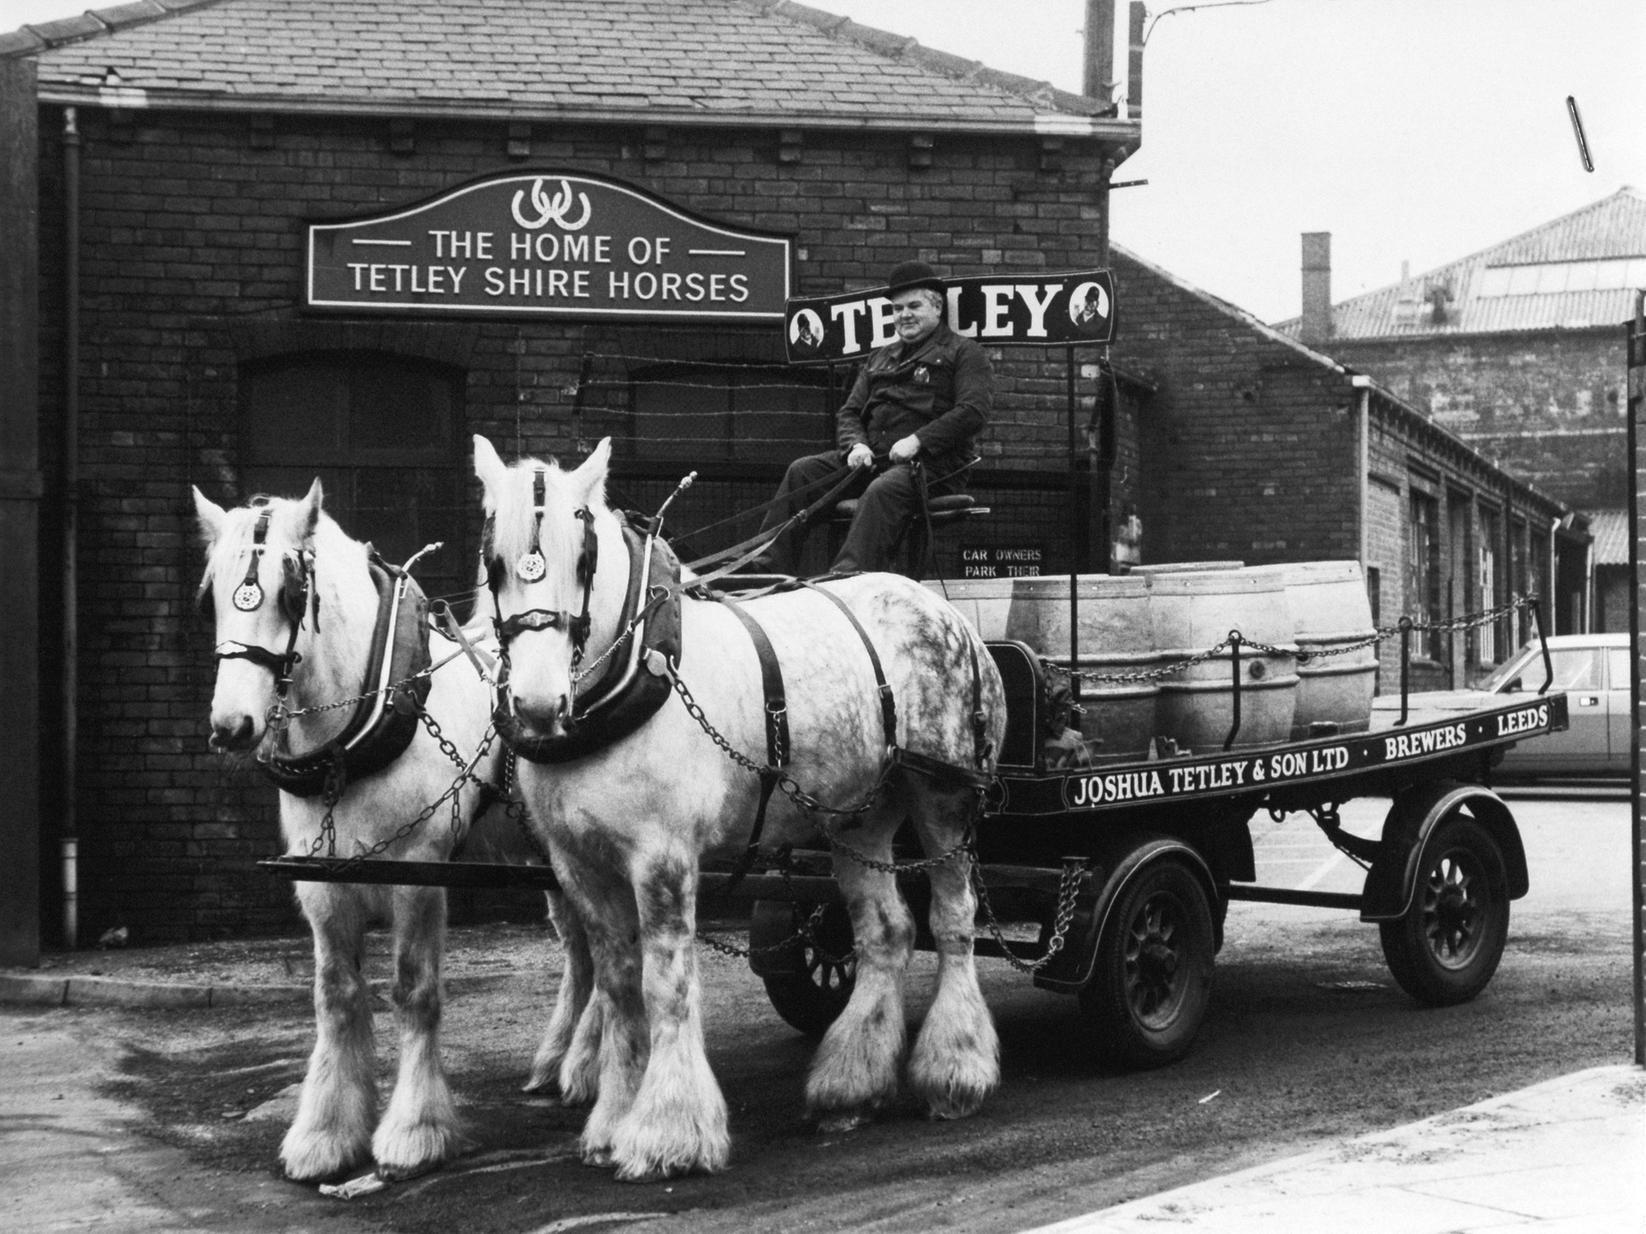 Joshua Tetley bought William Sykess Hunslet brewery in Leeds for 400 in 1822. The only way to deliver the beer was by horse and cart. They kept up to 120 horses and these were still working right up to 2006.